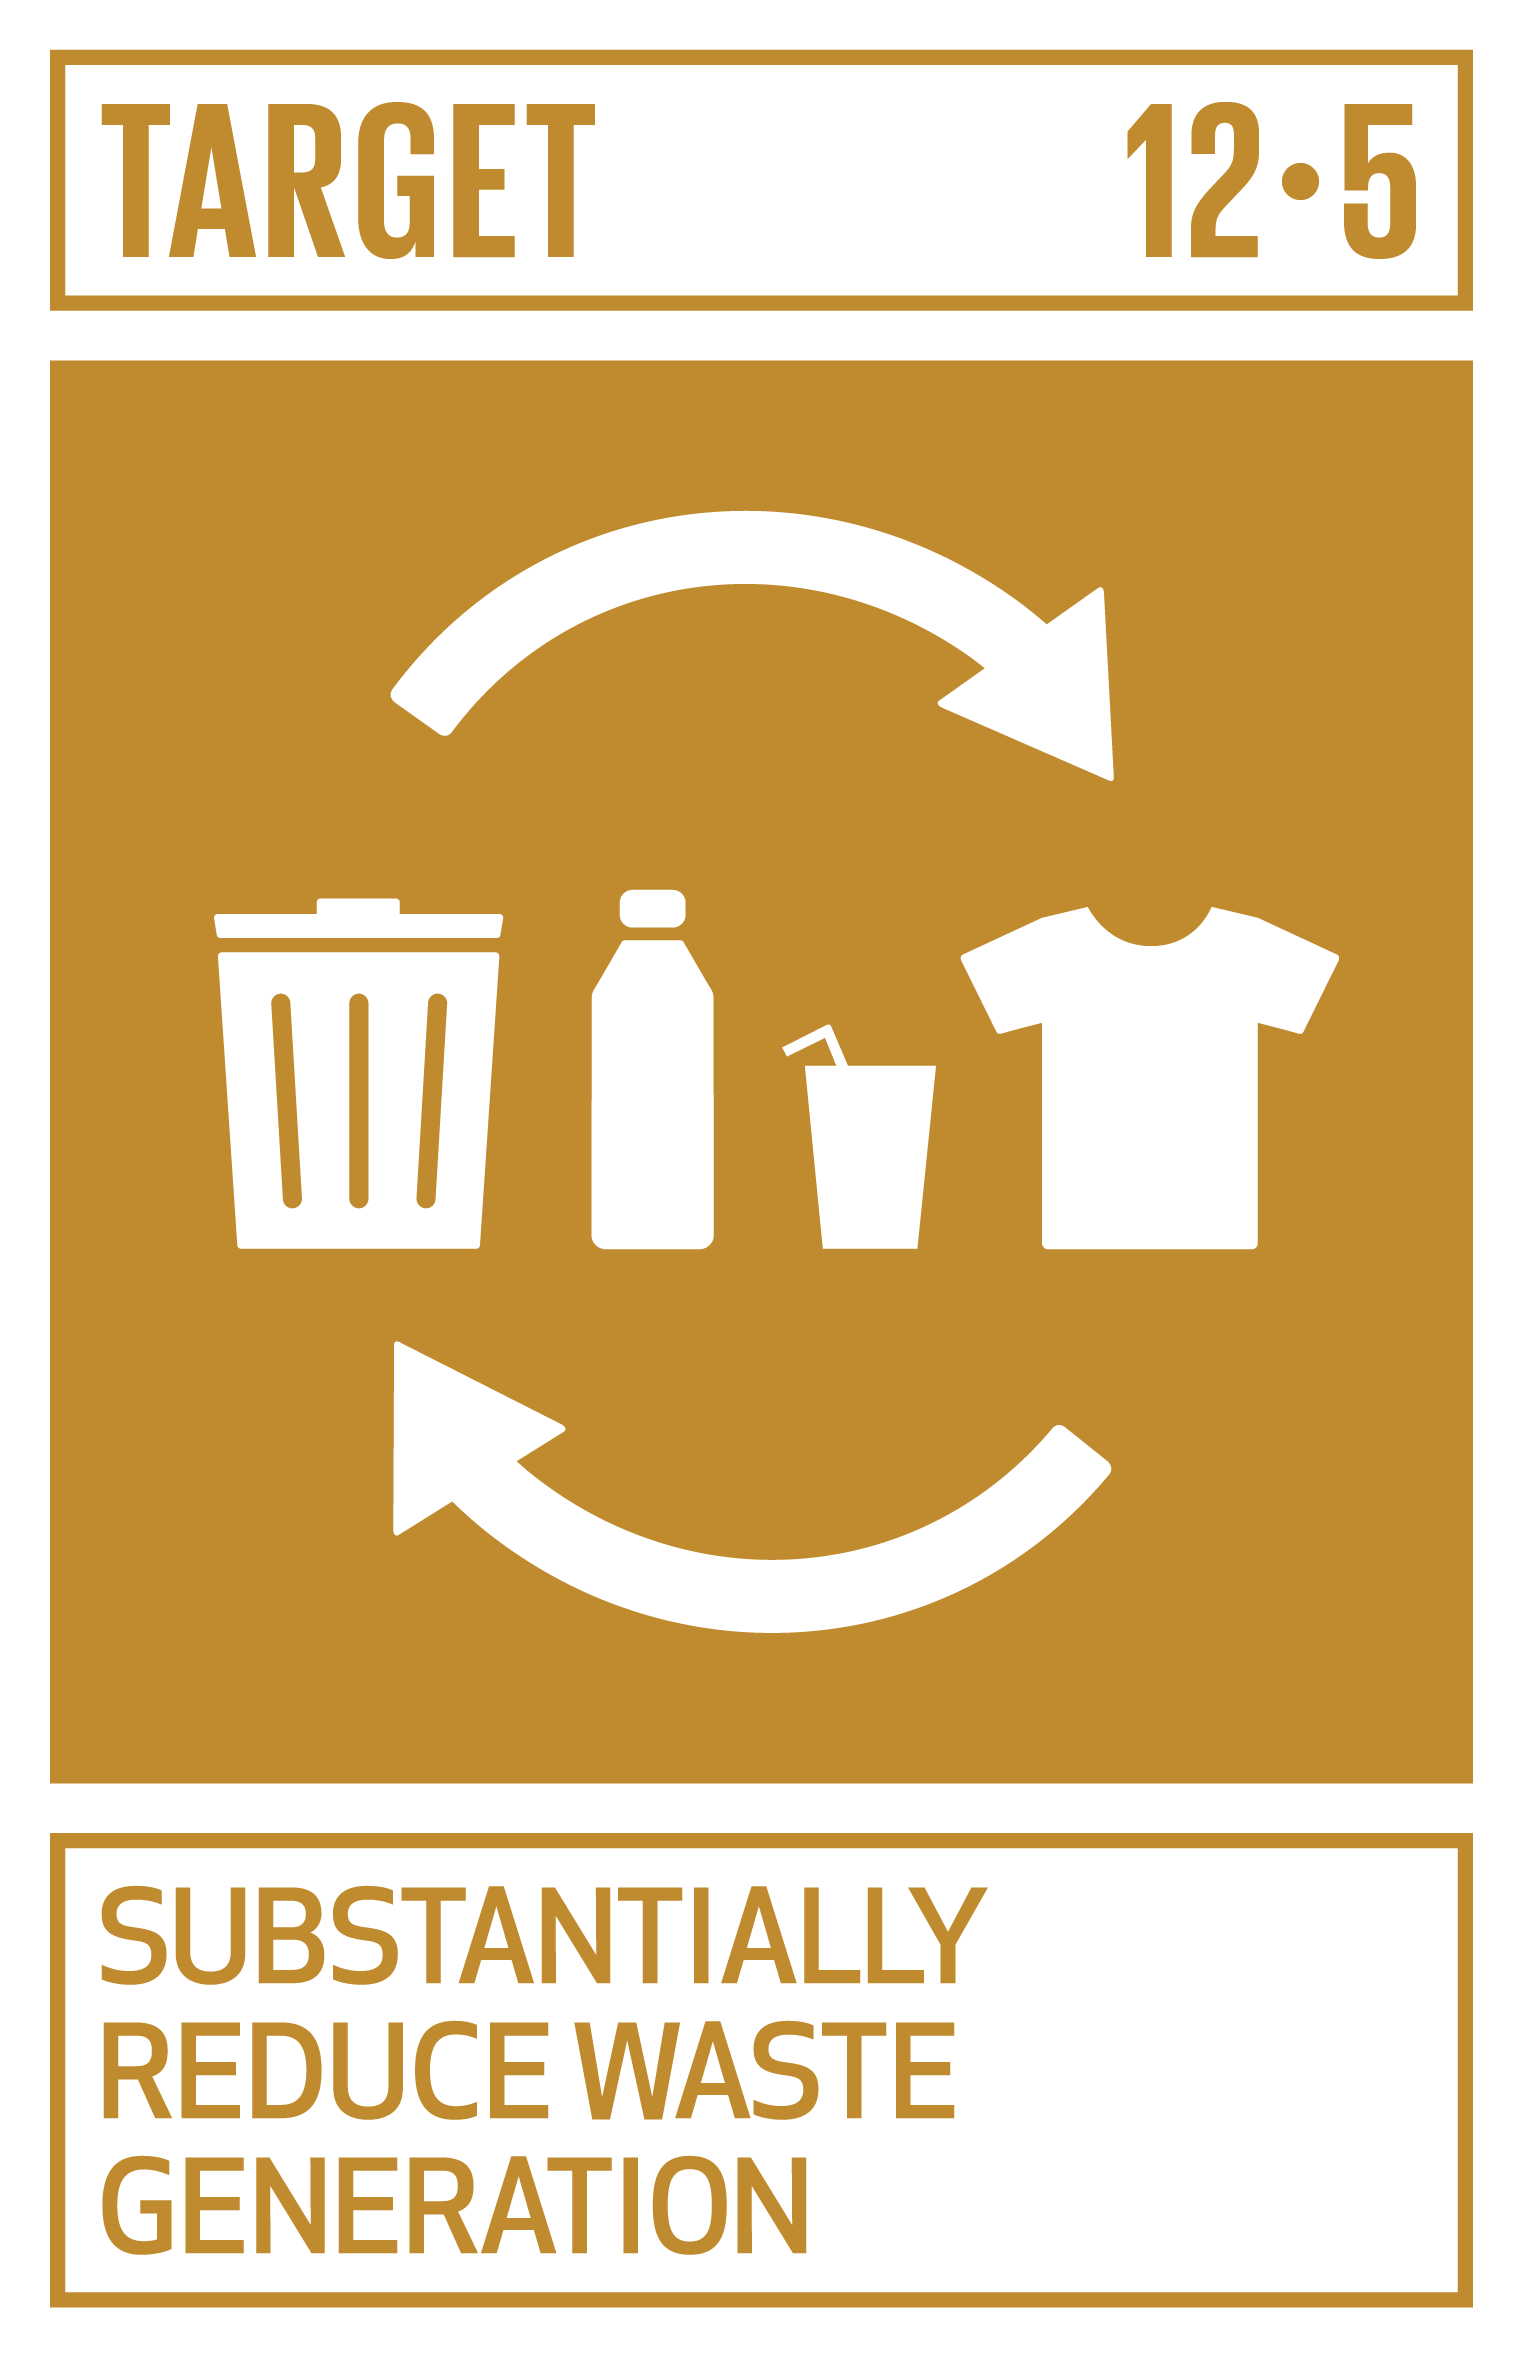 https://ocm.iccrom.org/sdgs/sdg-12-responsible-consumption-and-production/sdg-125-substantially-reduce-waste-generation